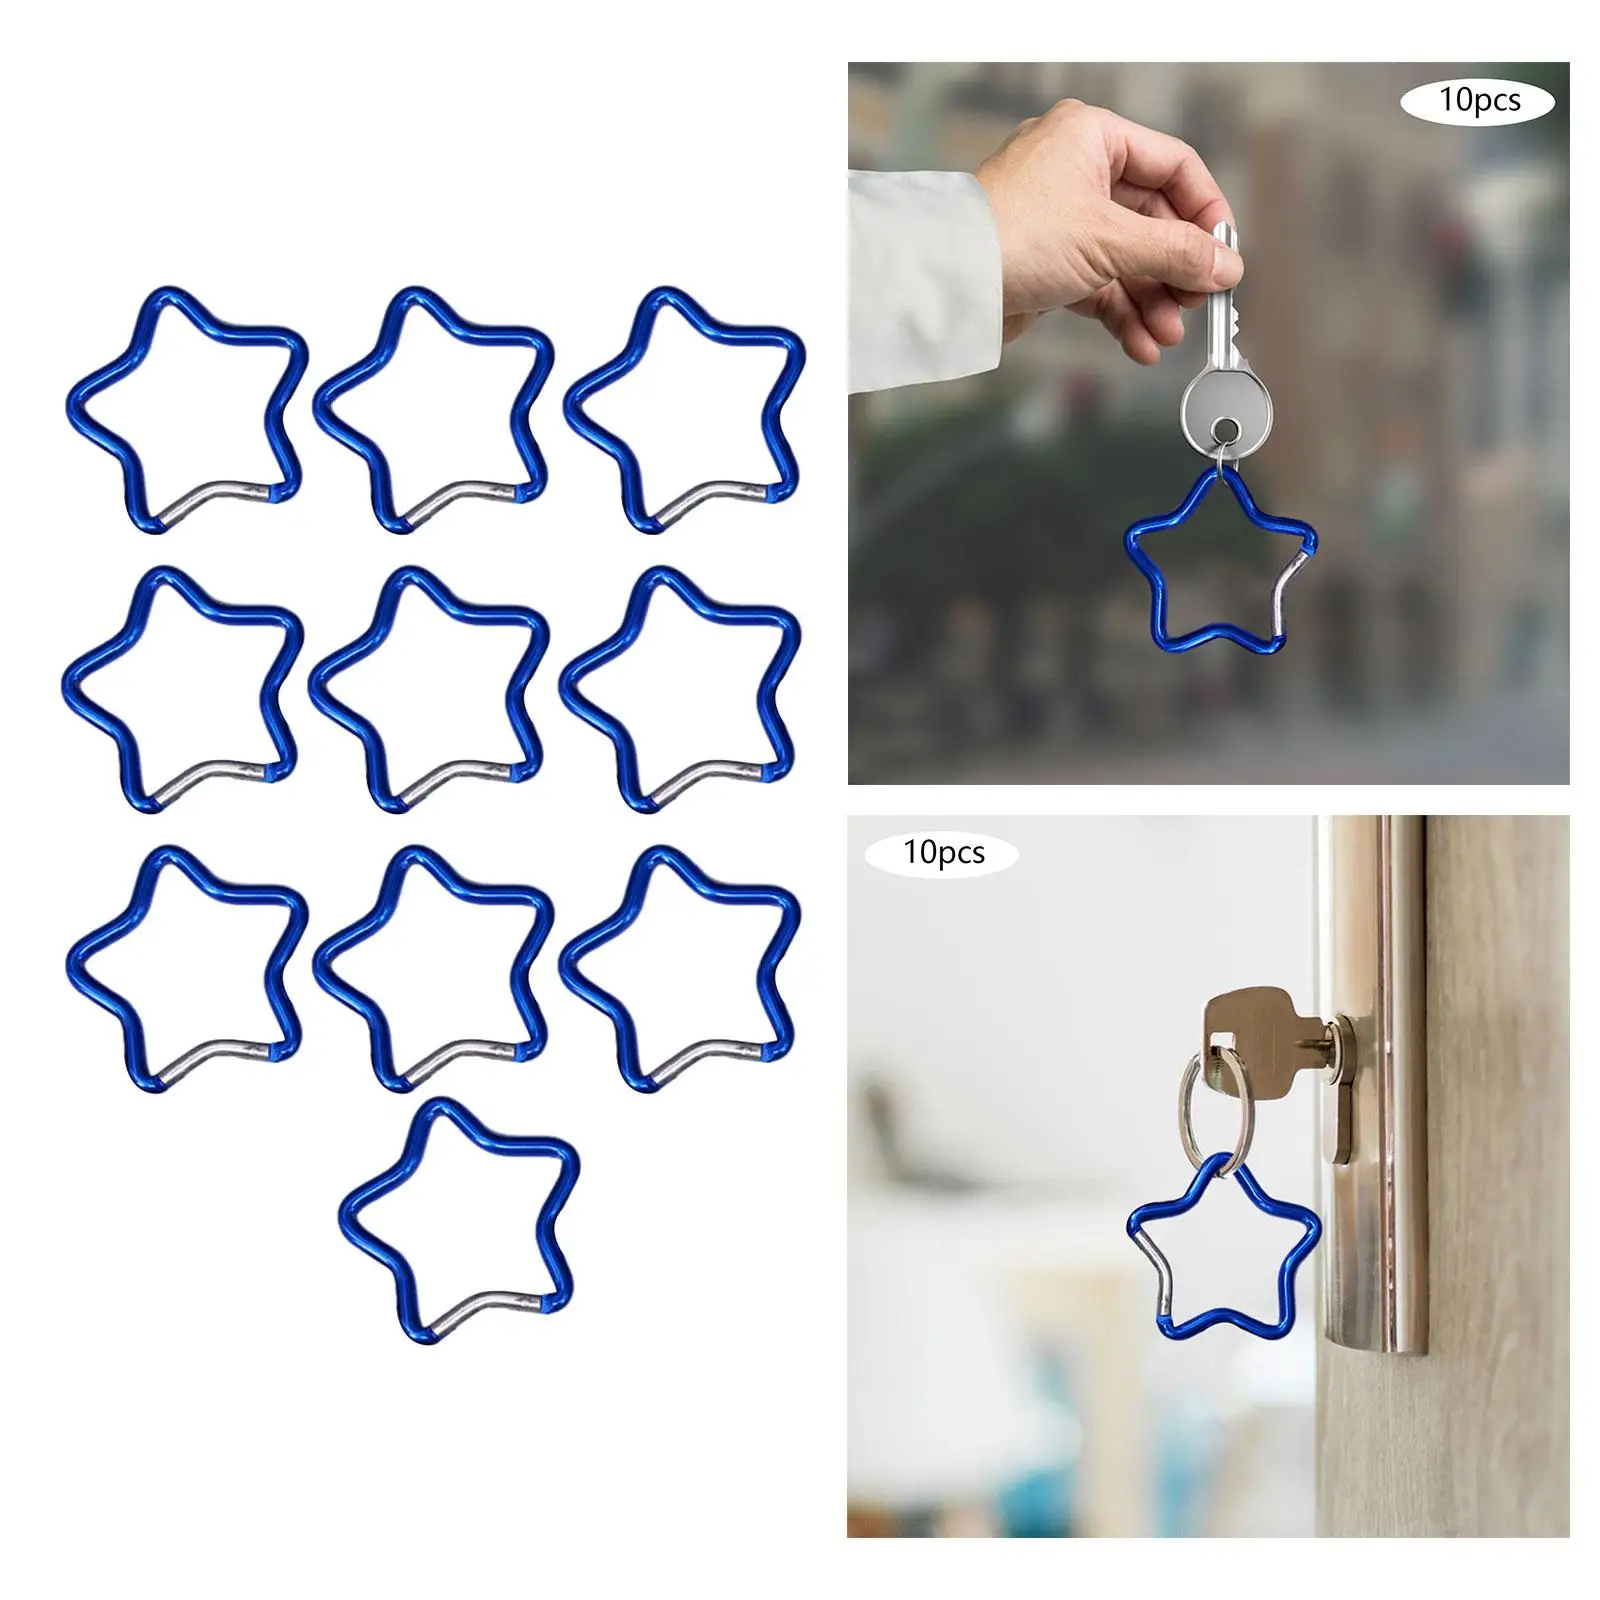 10Pcs Five Pointed Star Shaped Carabiner Key Chain Clip Quick Release Heavy Duty for Backpacks Traveling Hiking Keychains Home